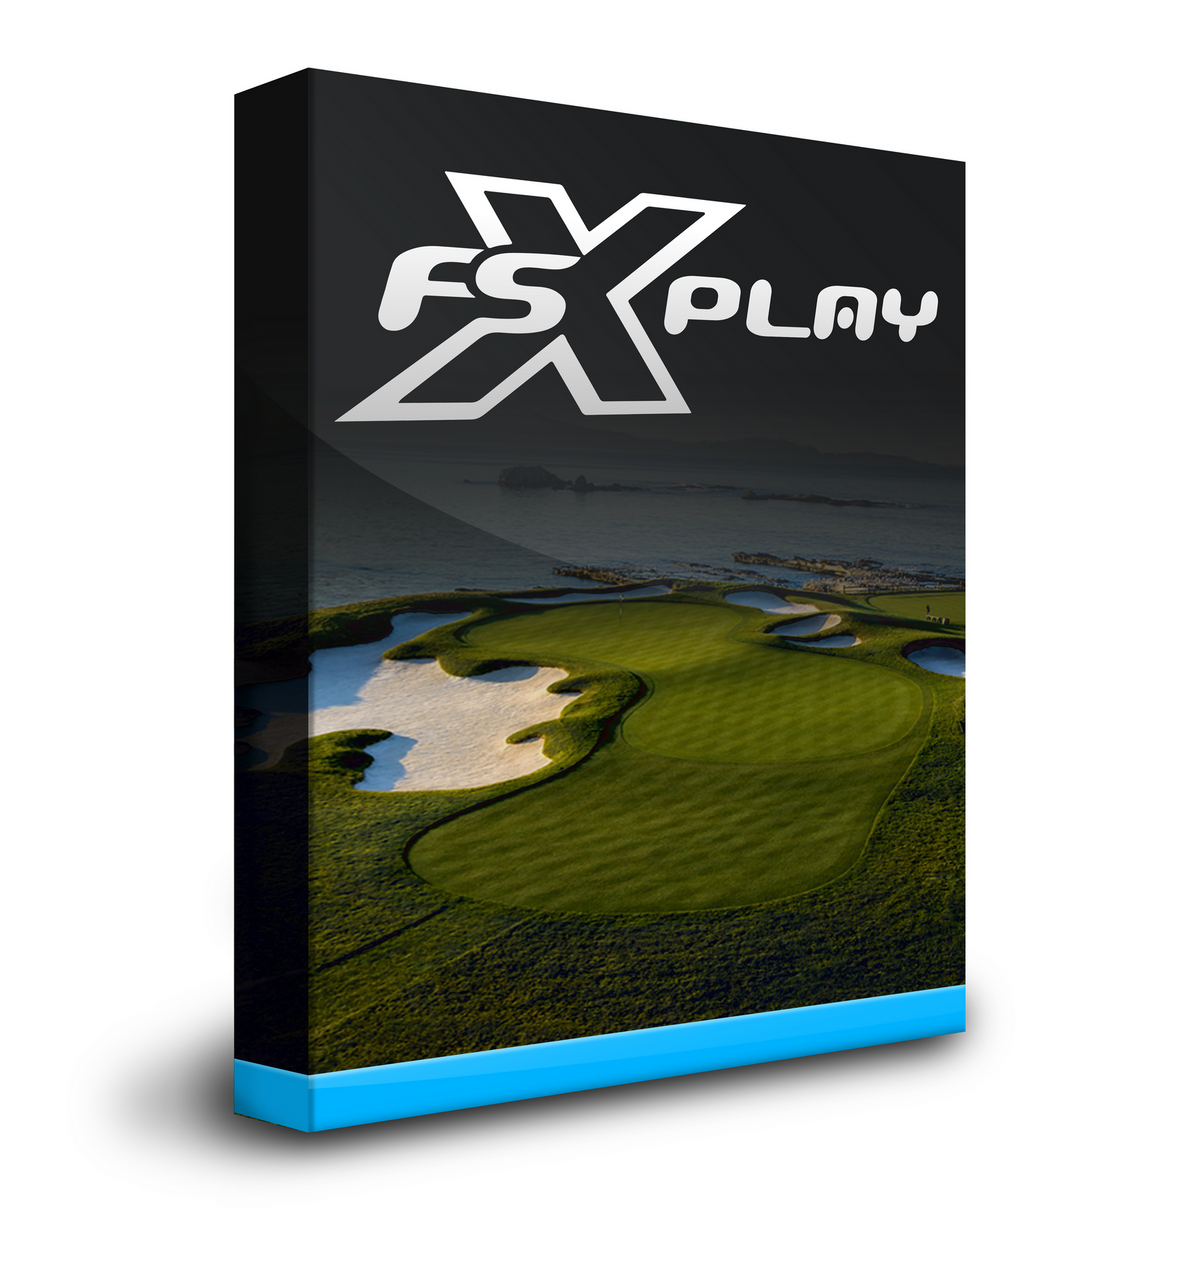 FSX Play Golf Simulator Software Included